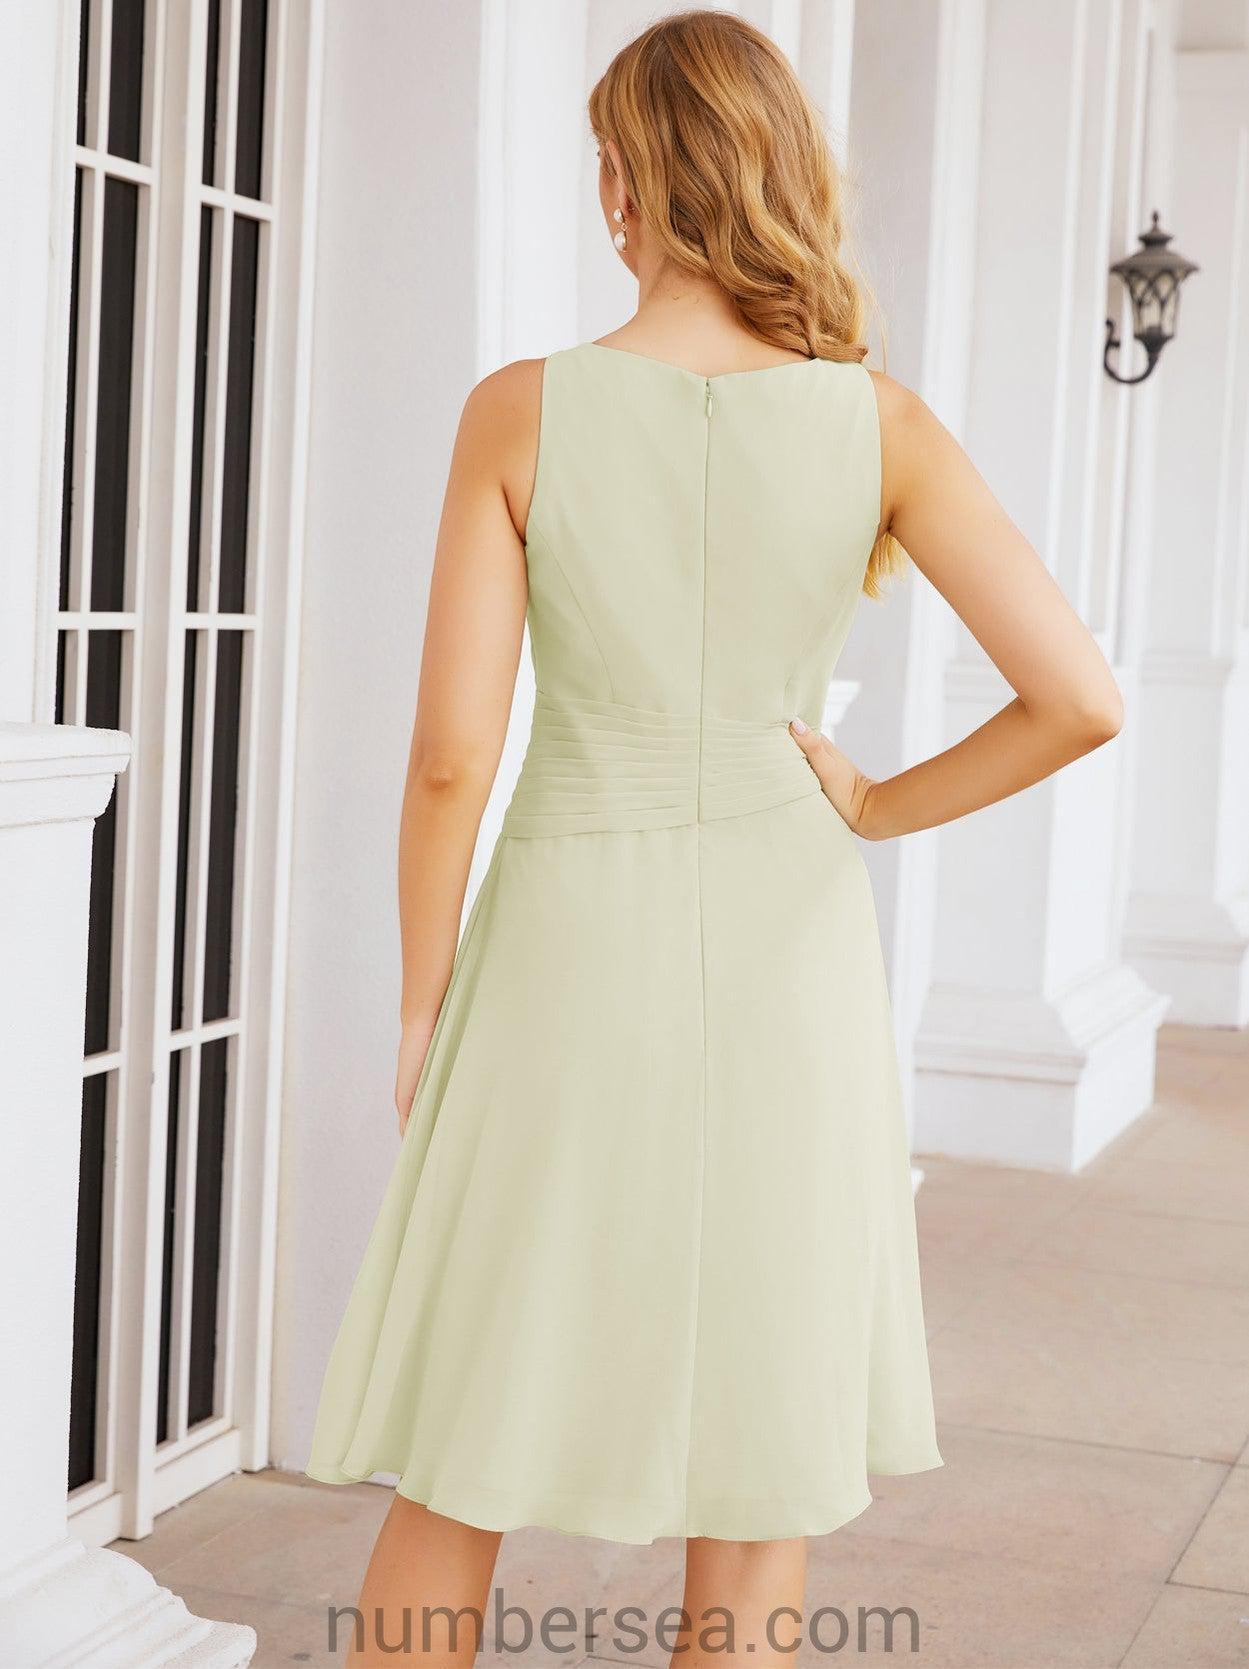 Numbersea Chiffon Mother Of The Bride Dresses Prom Dress For Wedding Guest Casual Pleated 28065